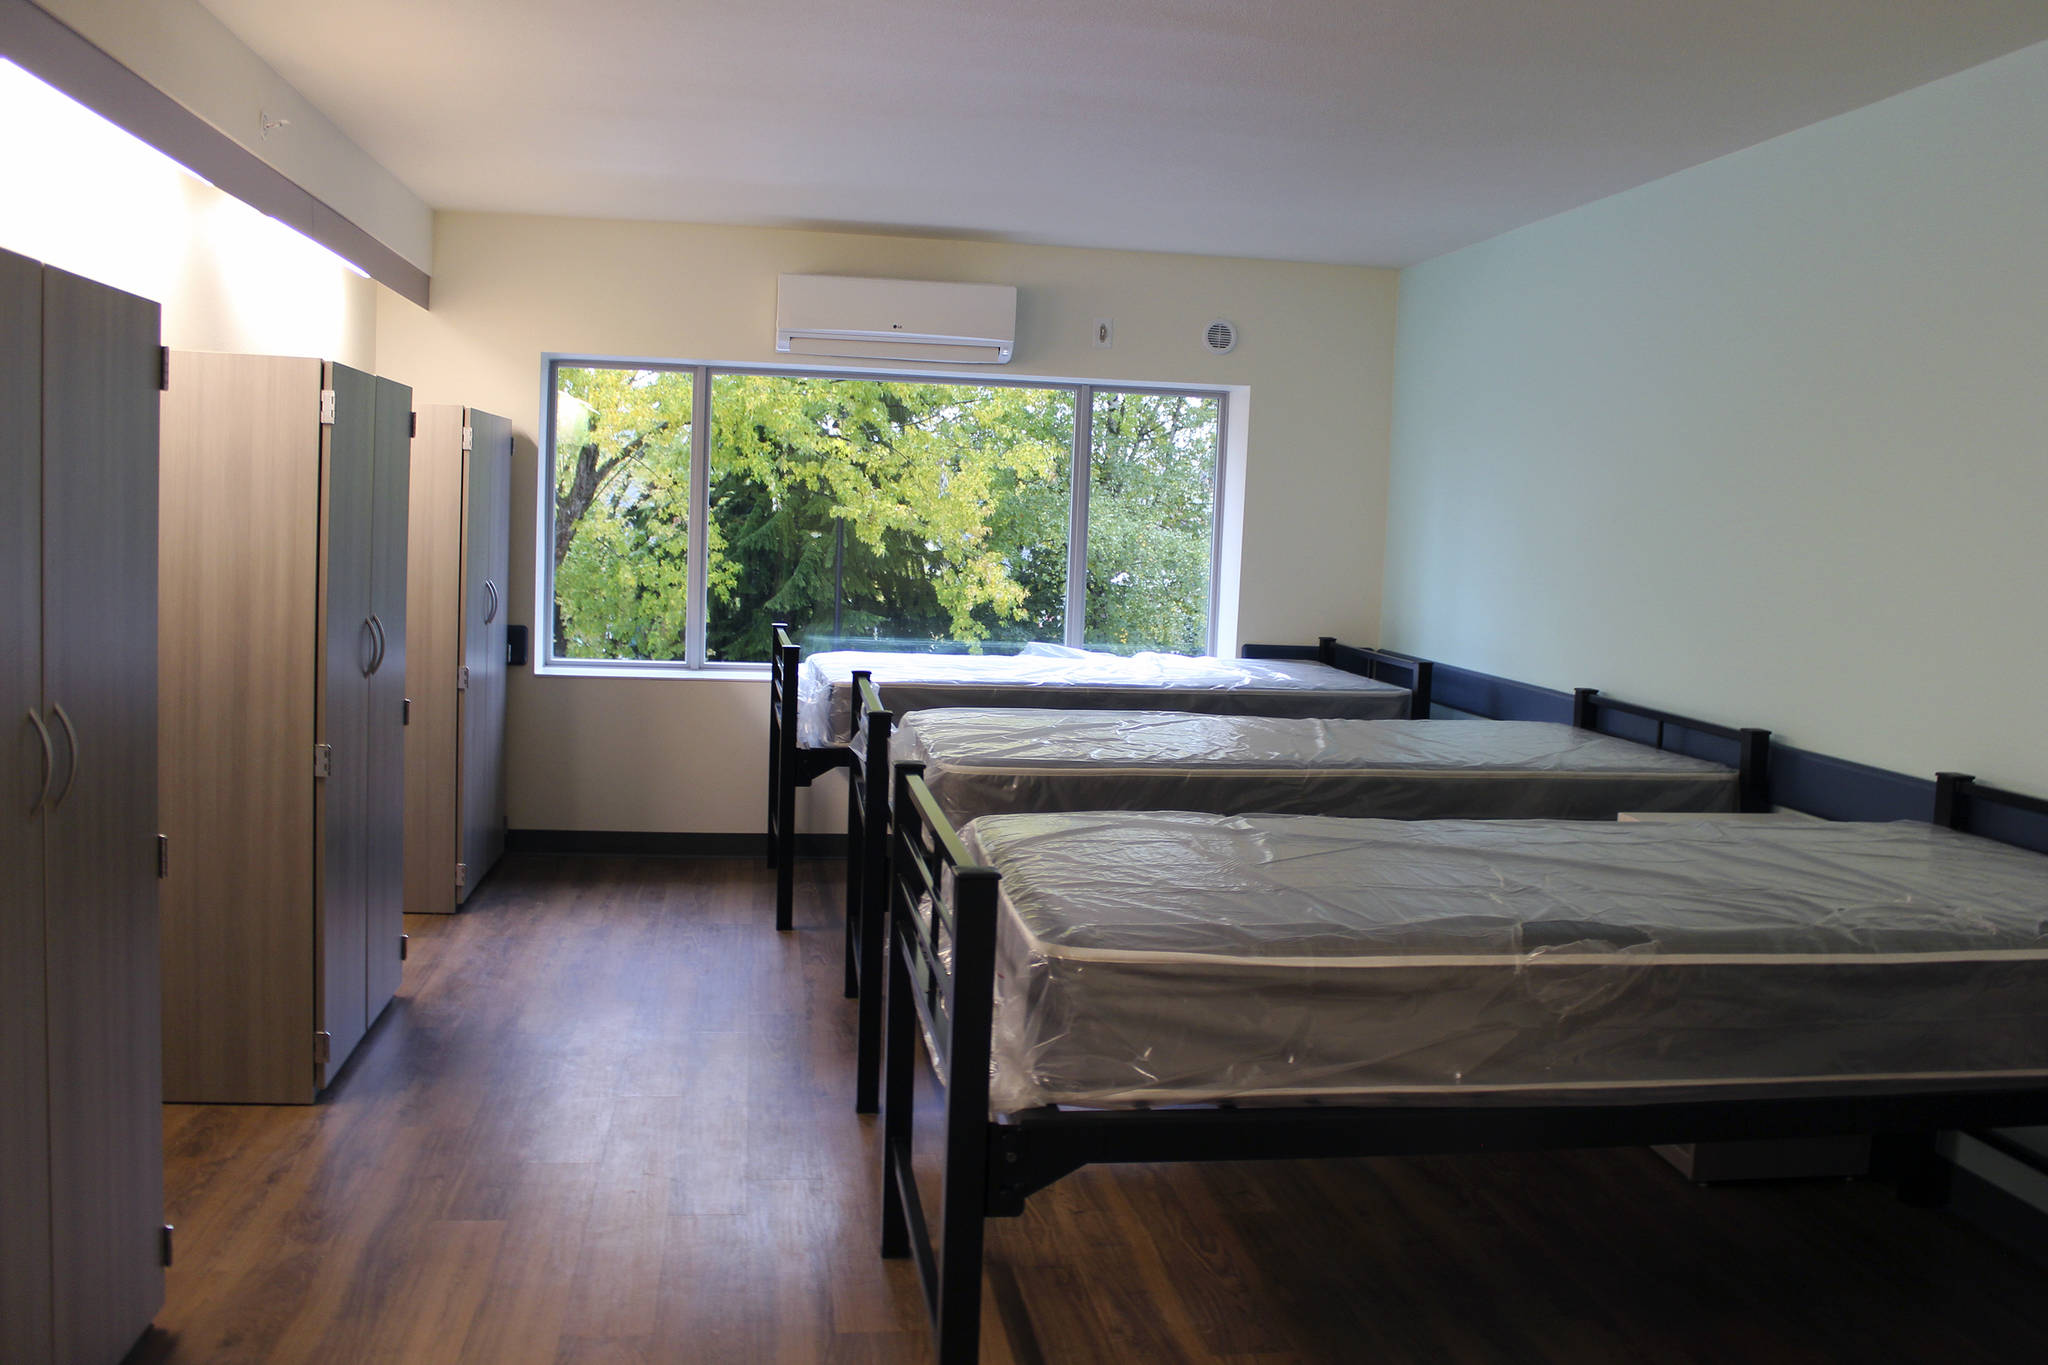 Beds at Recovery Place, a new substance abuse and mental health treatment facility in Seattle. Photo by Sara Bernard